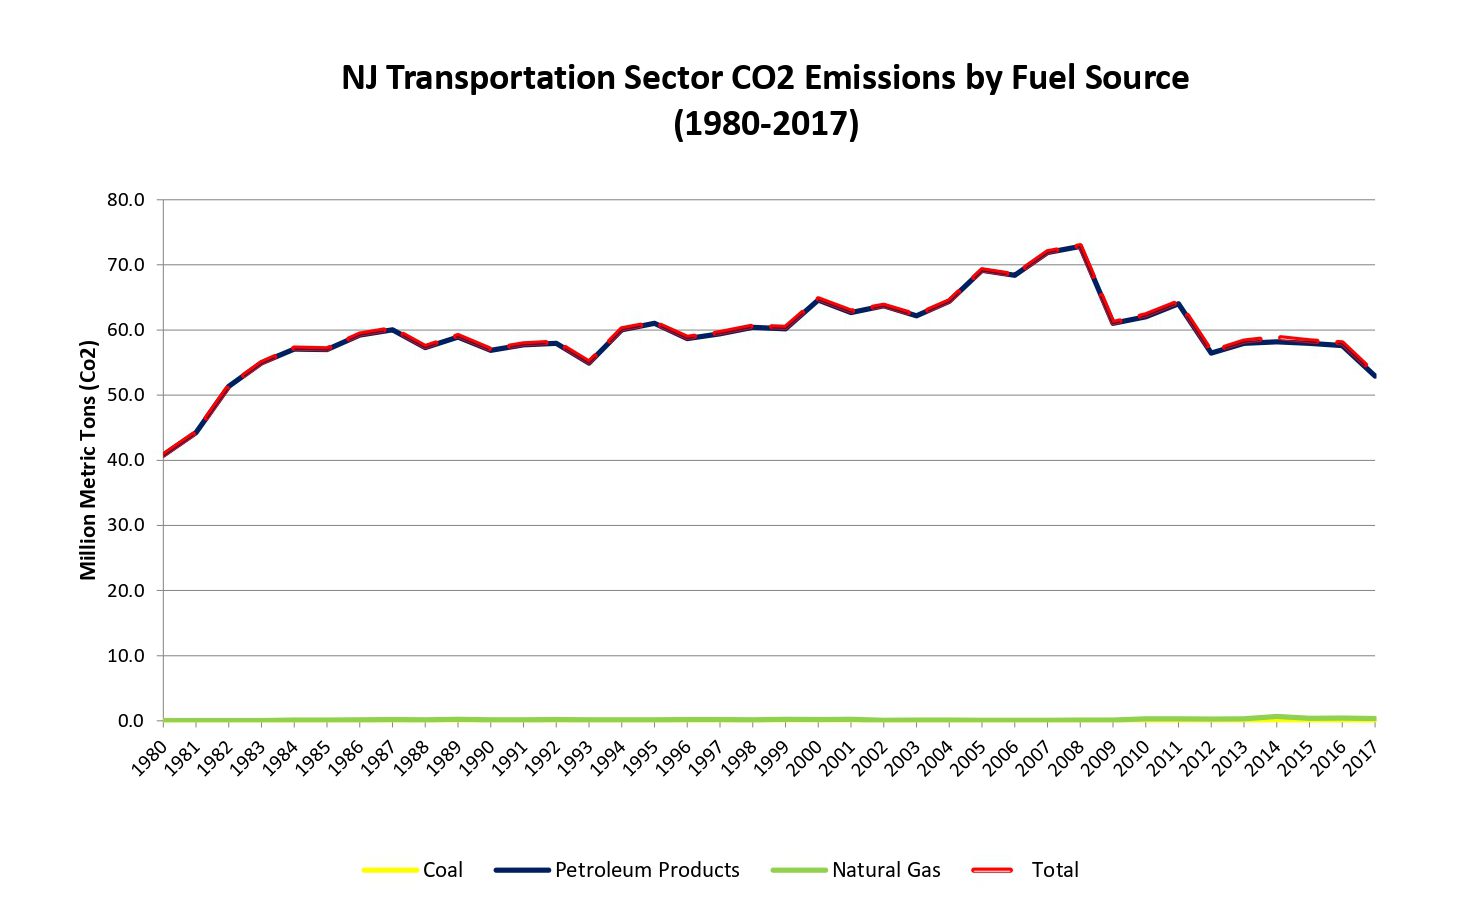 NJ Transportation Sector C02 by Fuel Source